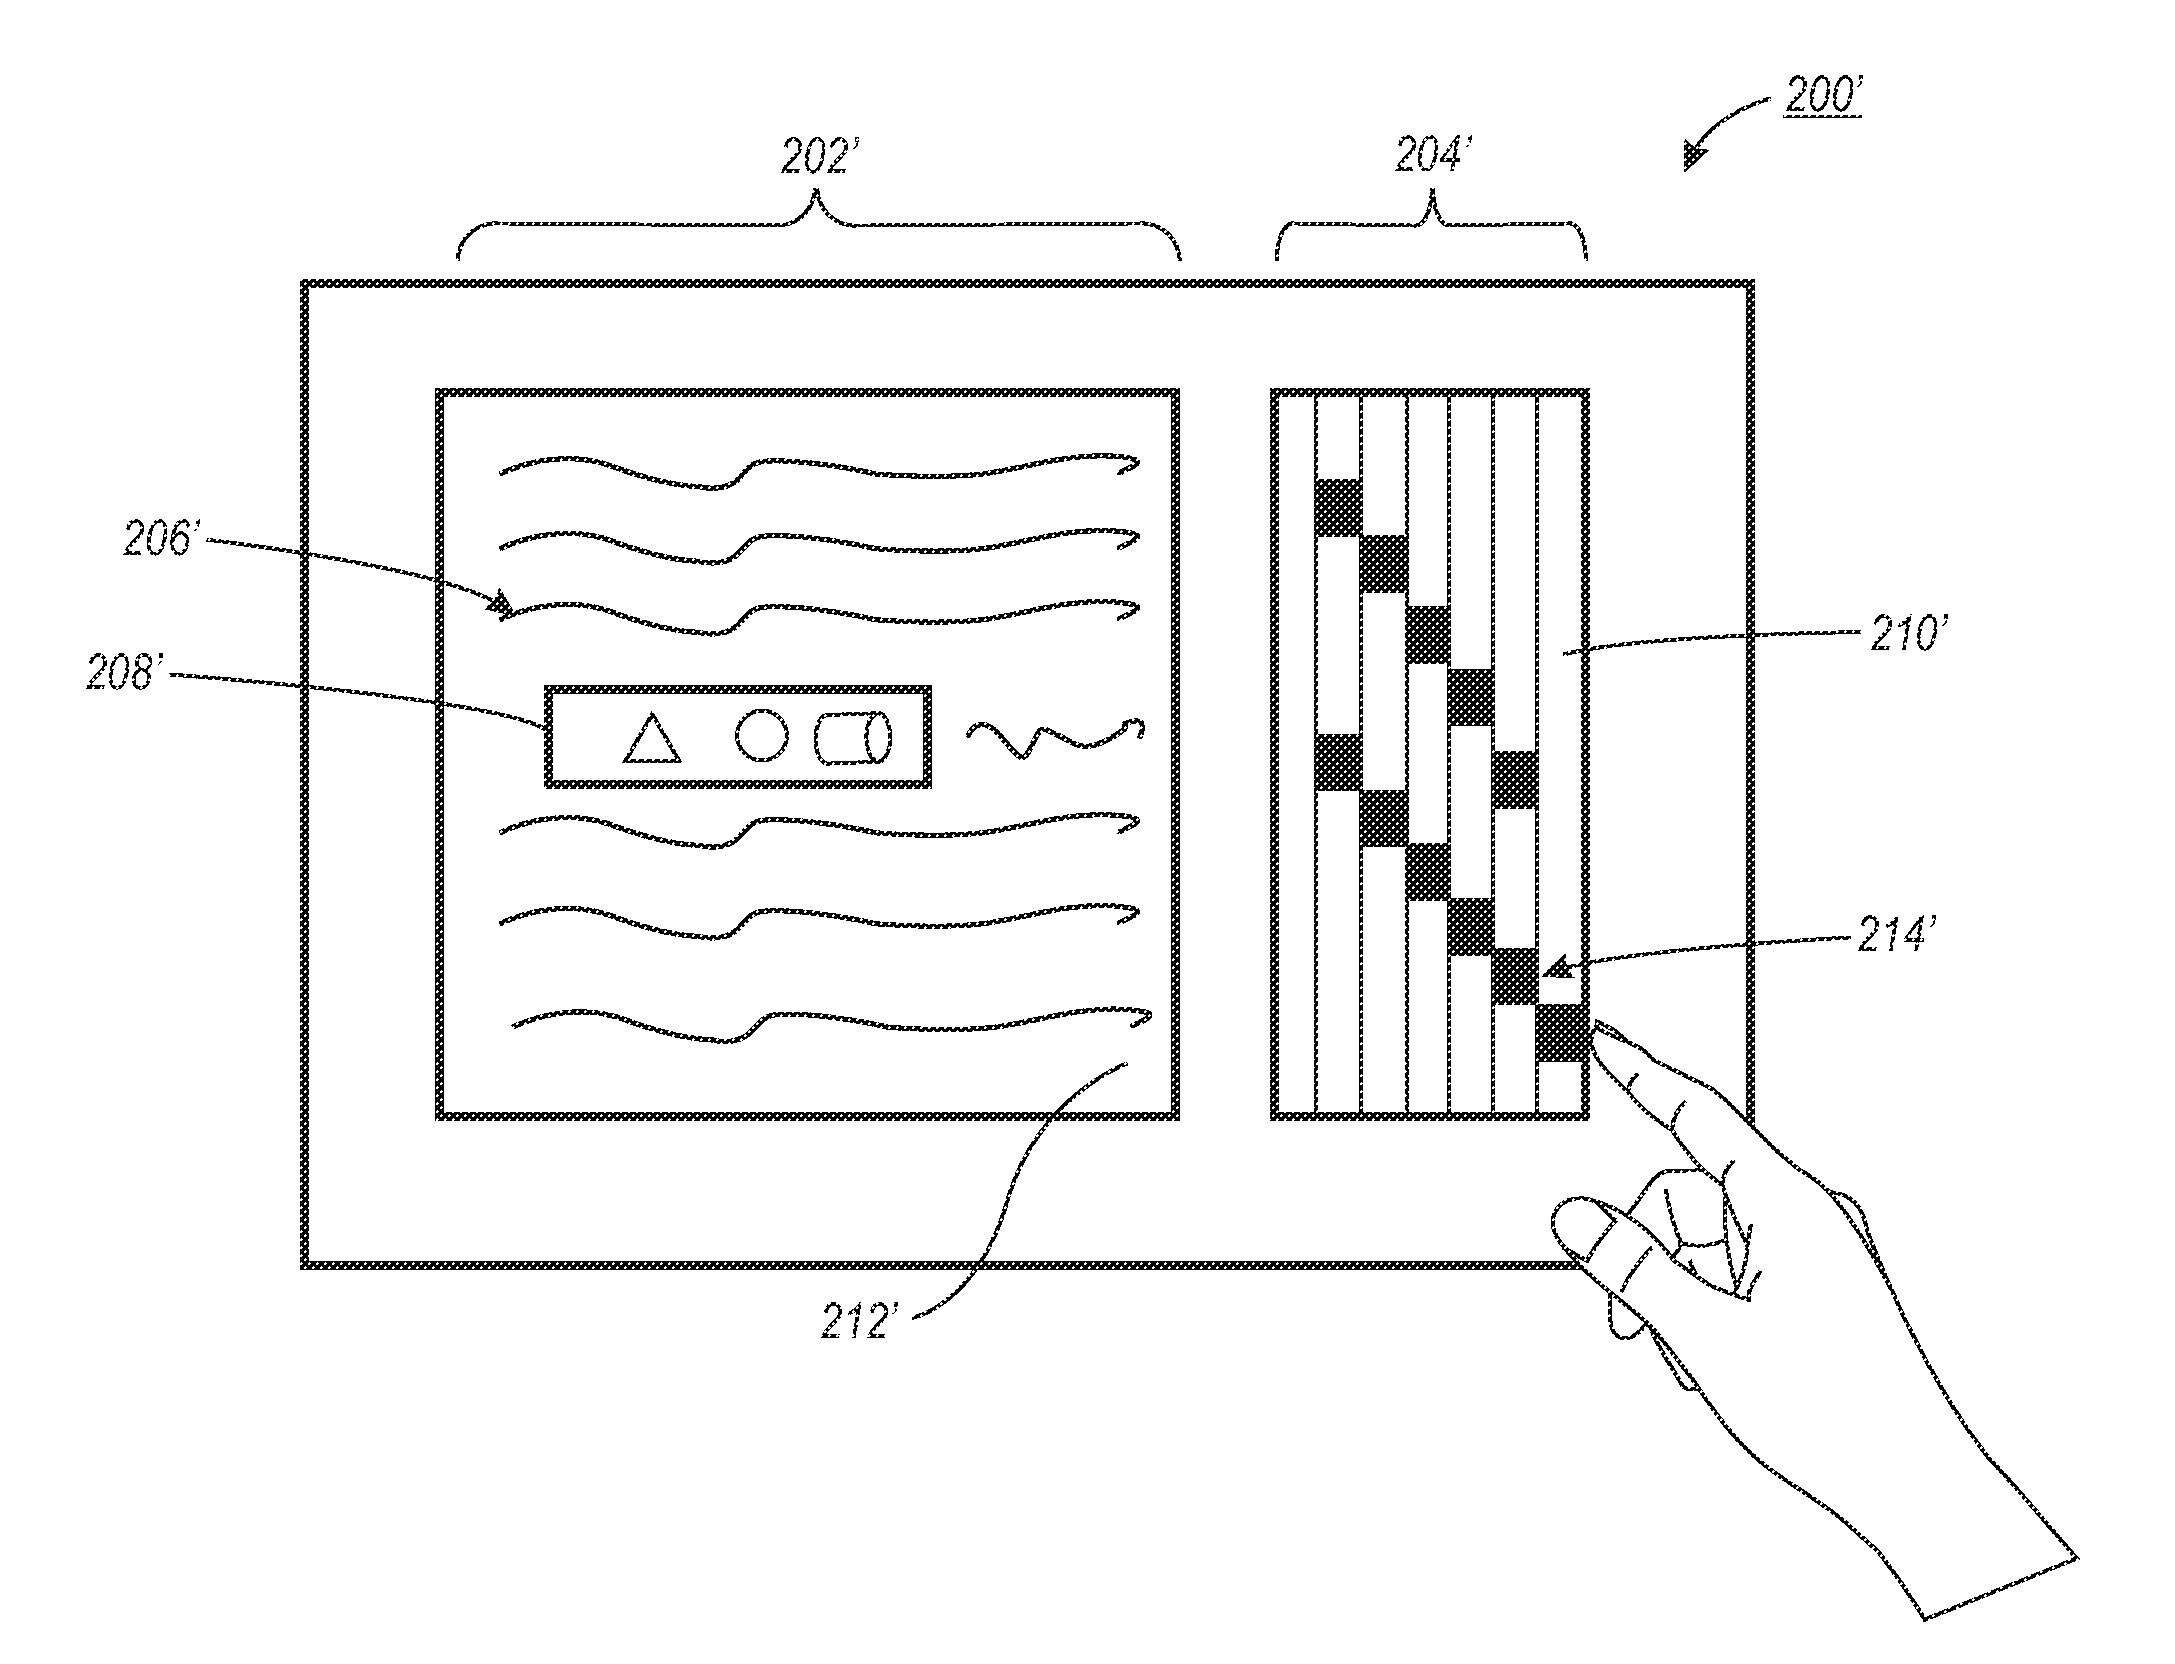 Riffler interface for an electronic reading device